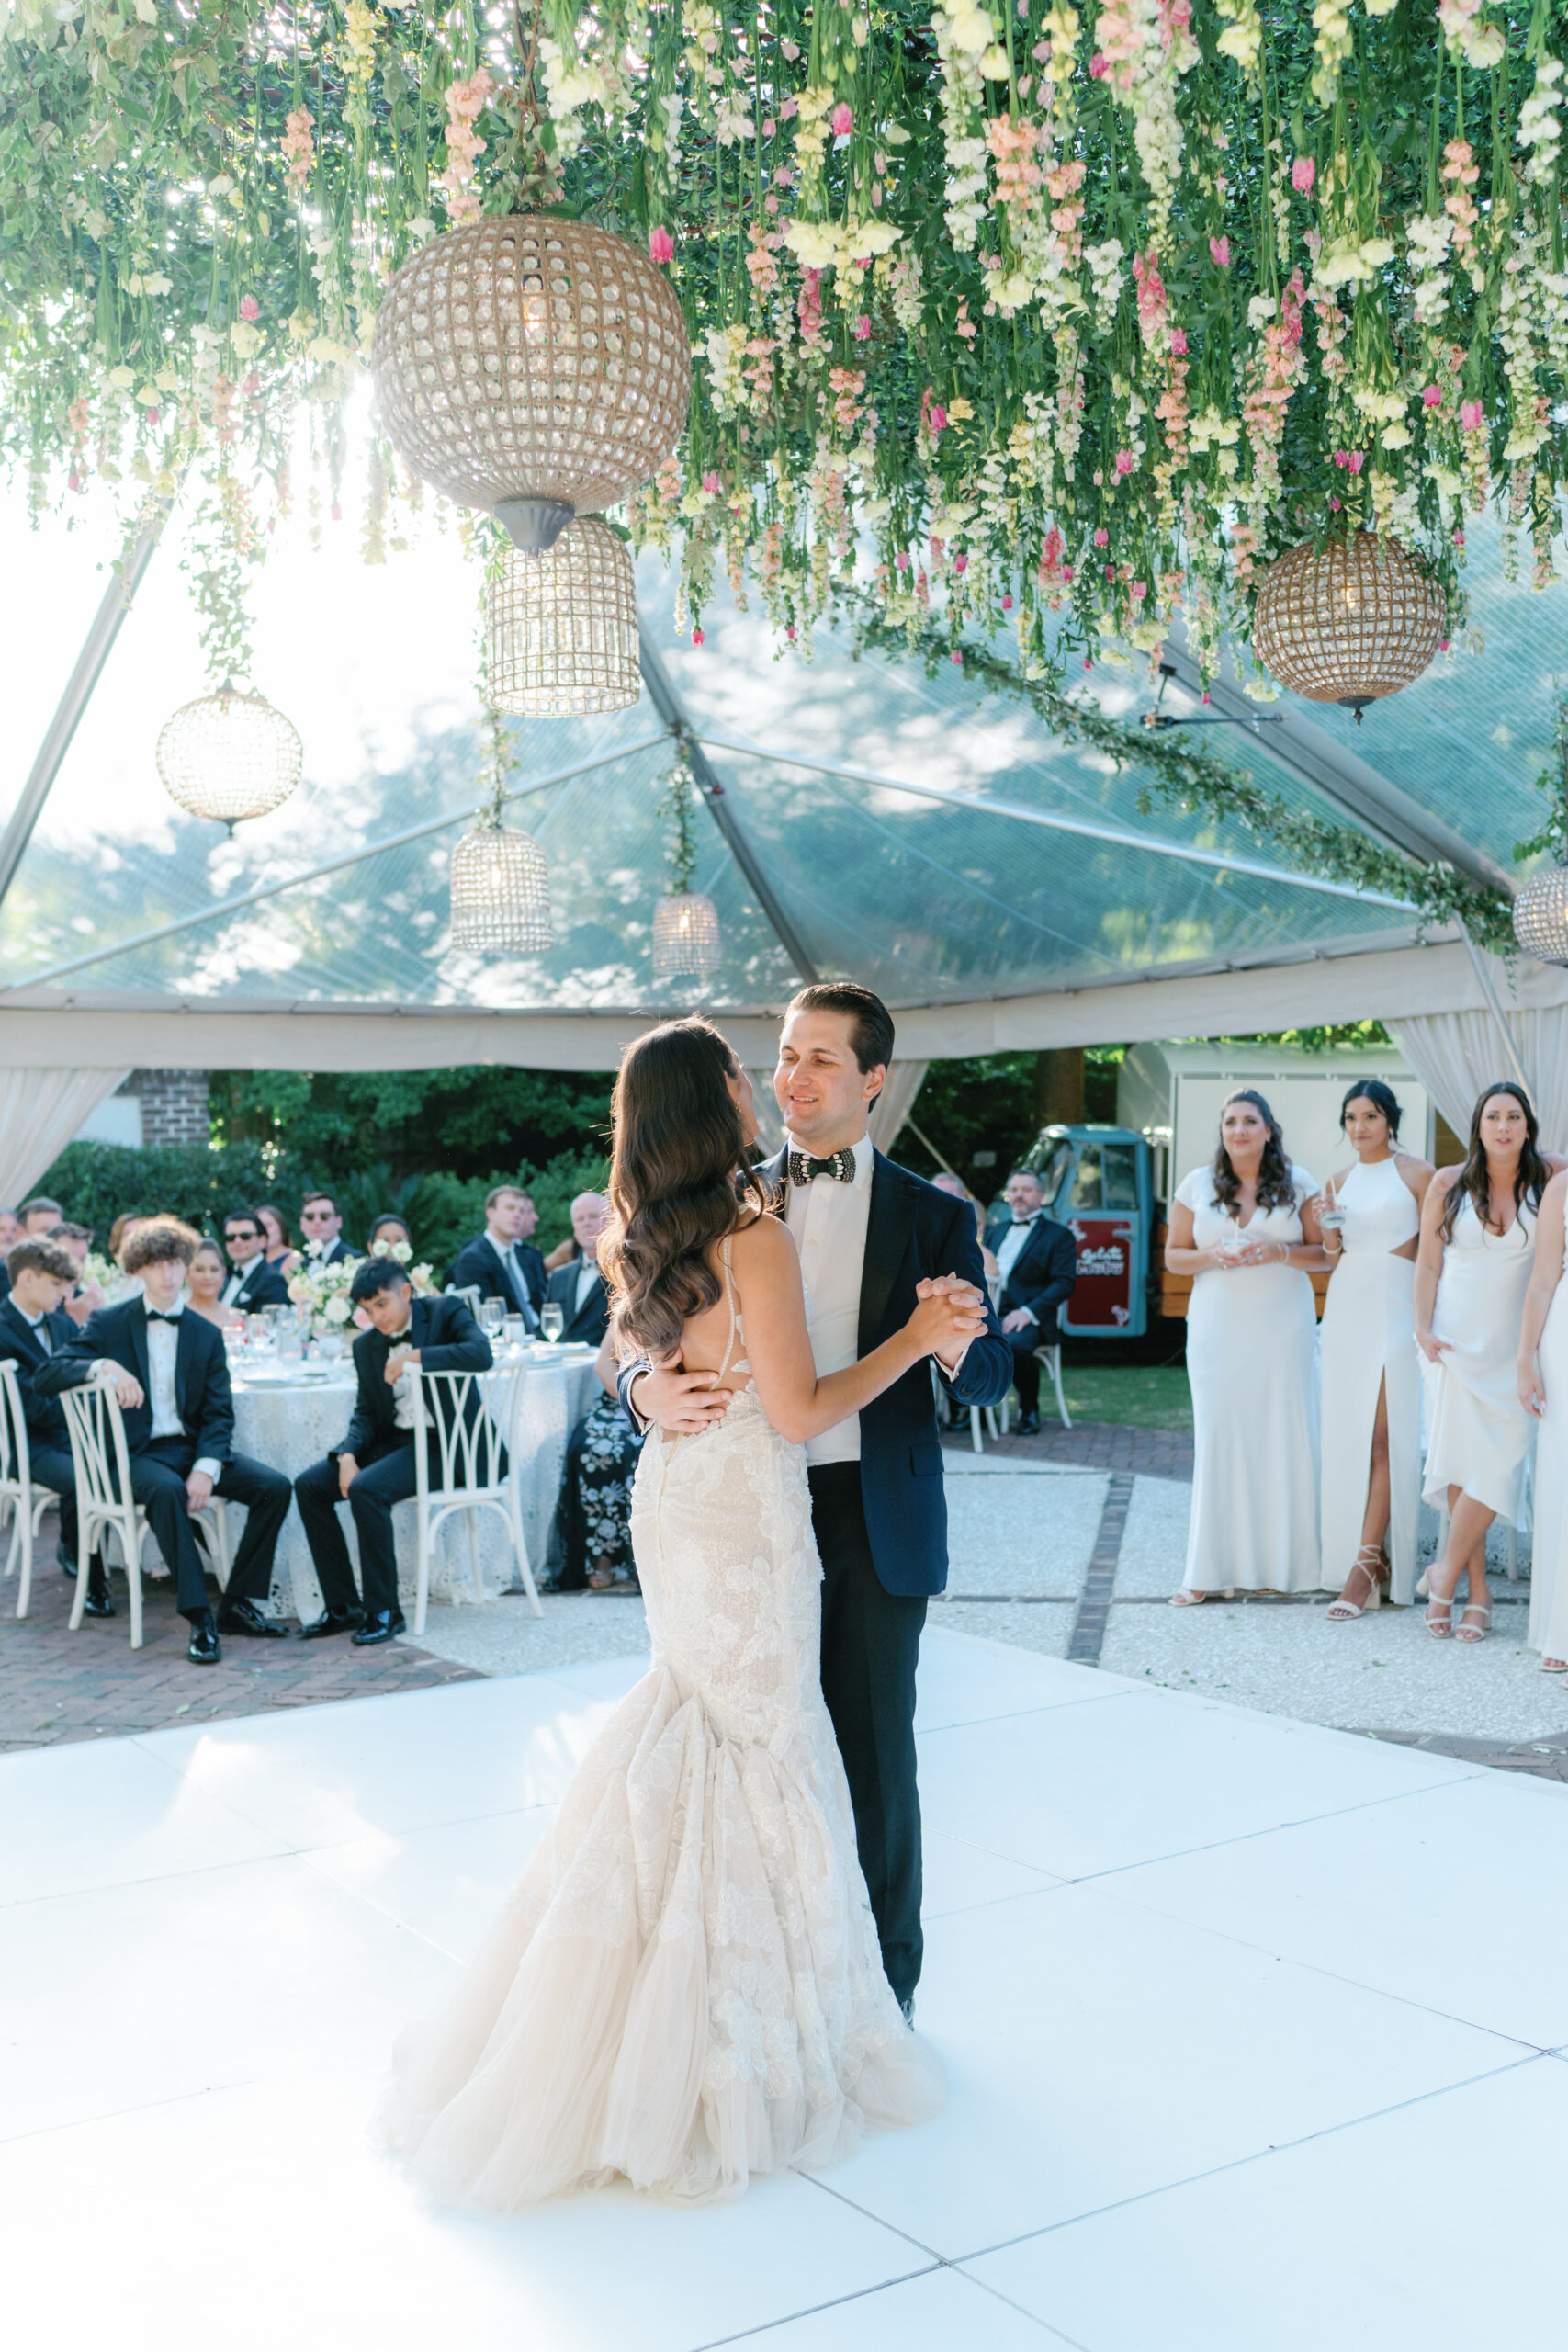 First dance in gorgeous spring light.